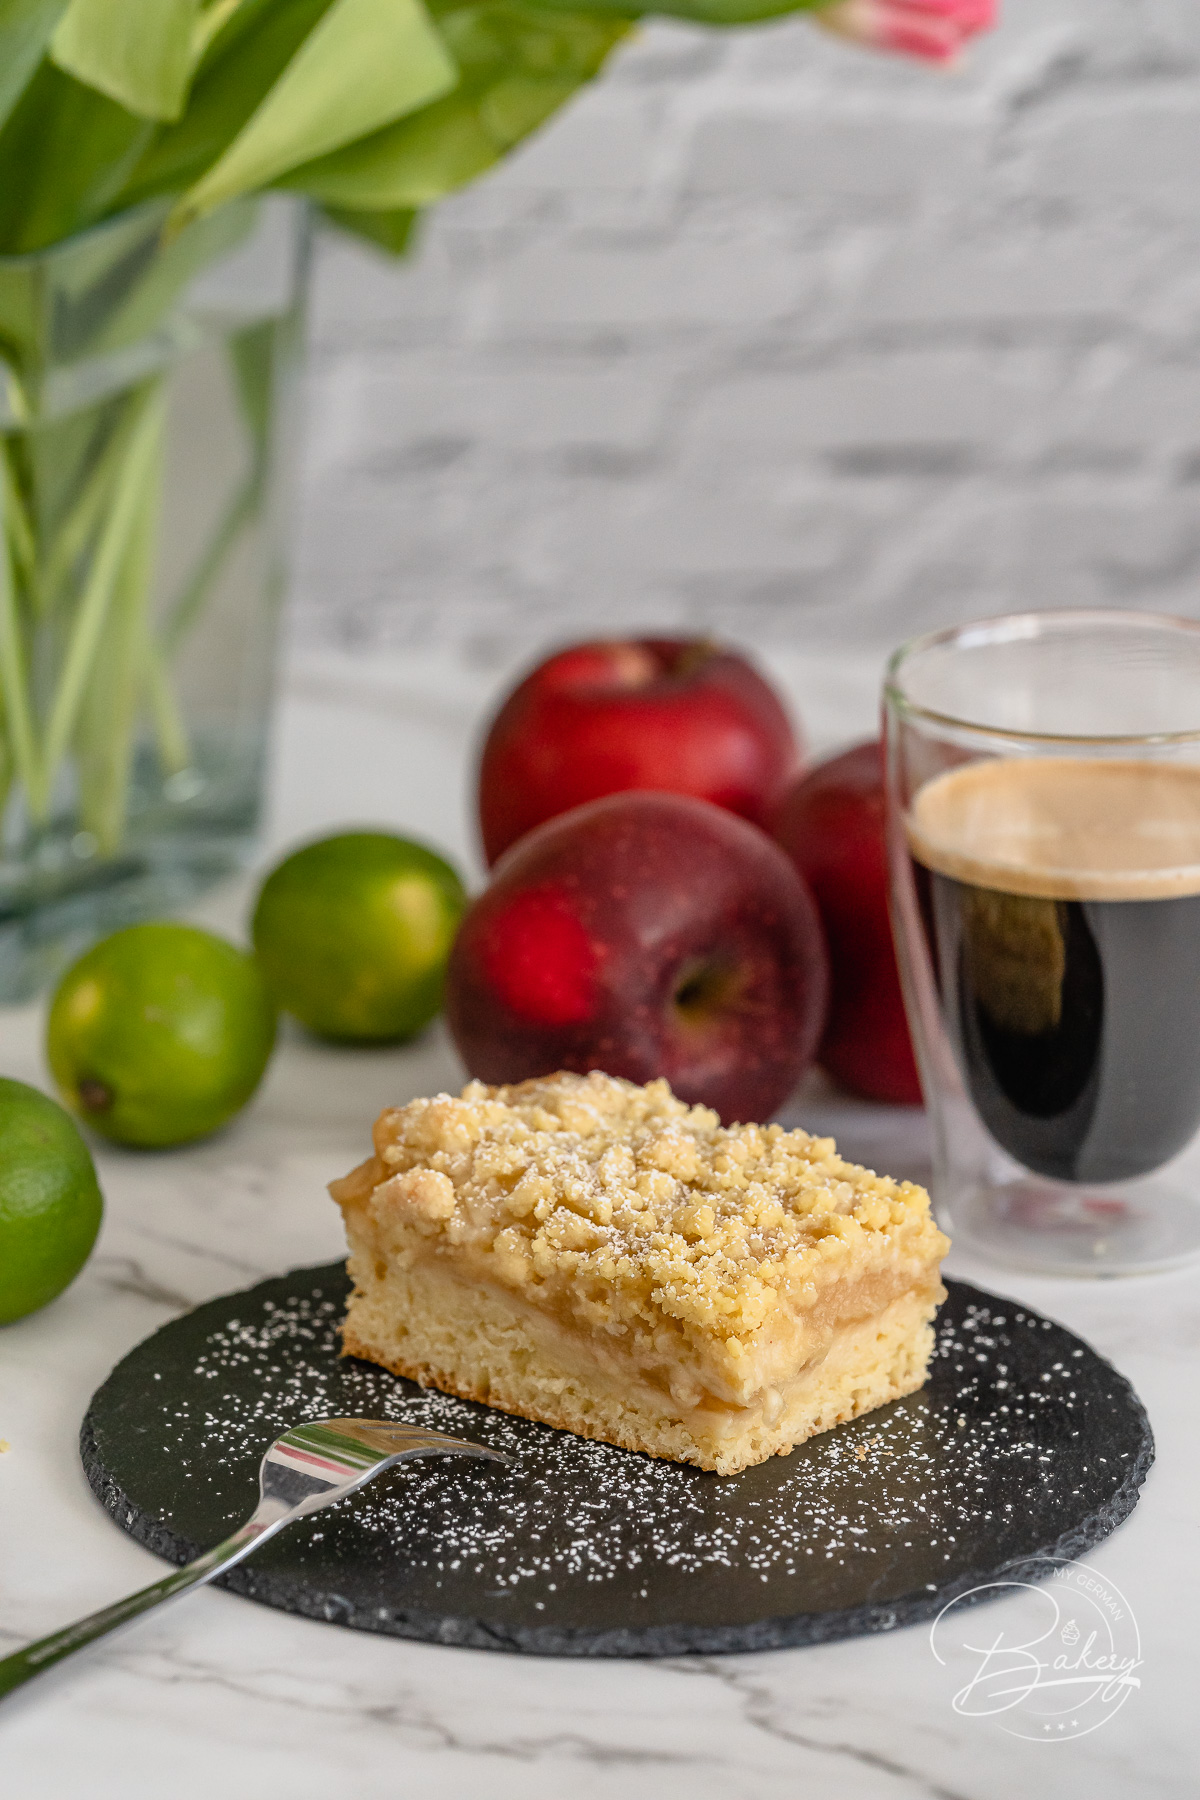 Apple crumble cake recipe - yeast cake delicious and easy - Delicious apple crumble cake recipe for yeast cake and crumble cake. Cake with butter crumbles and applesauce - quick easy instructions - delicious yeast cake - recipe sheet cake - easy cake with dry yeast.